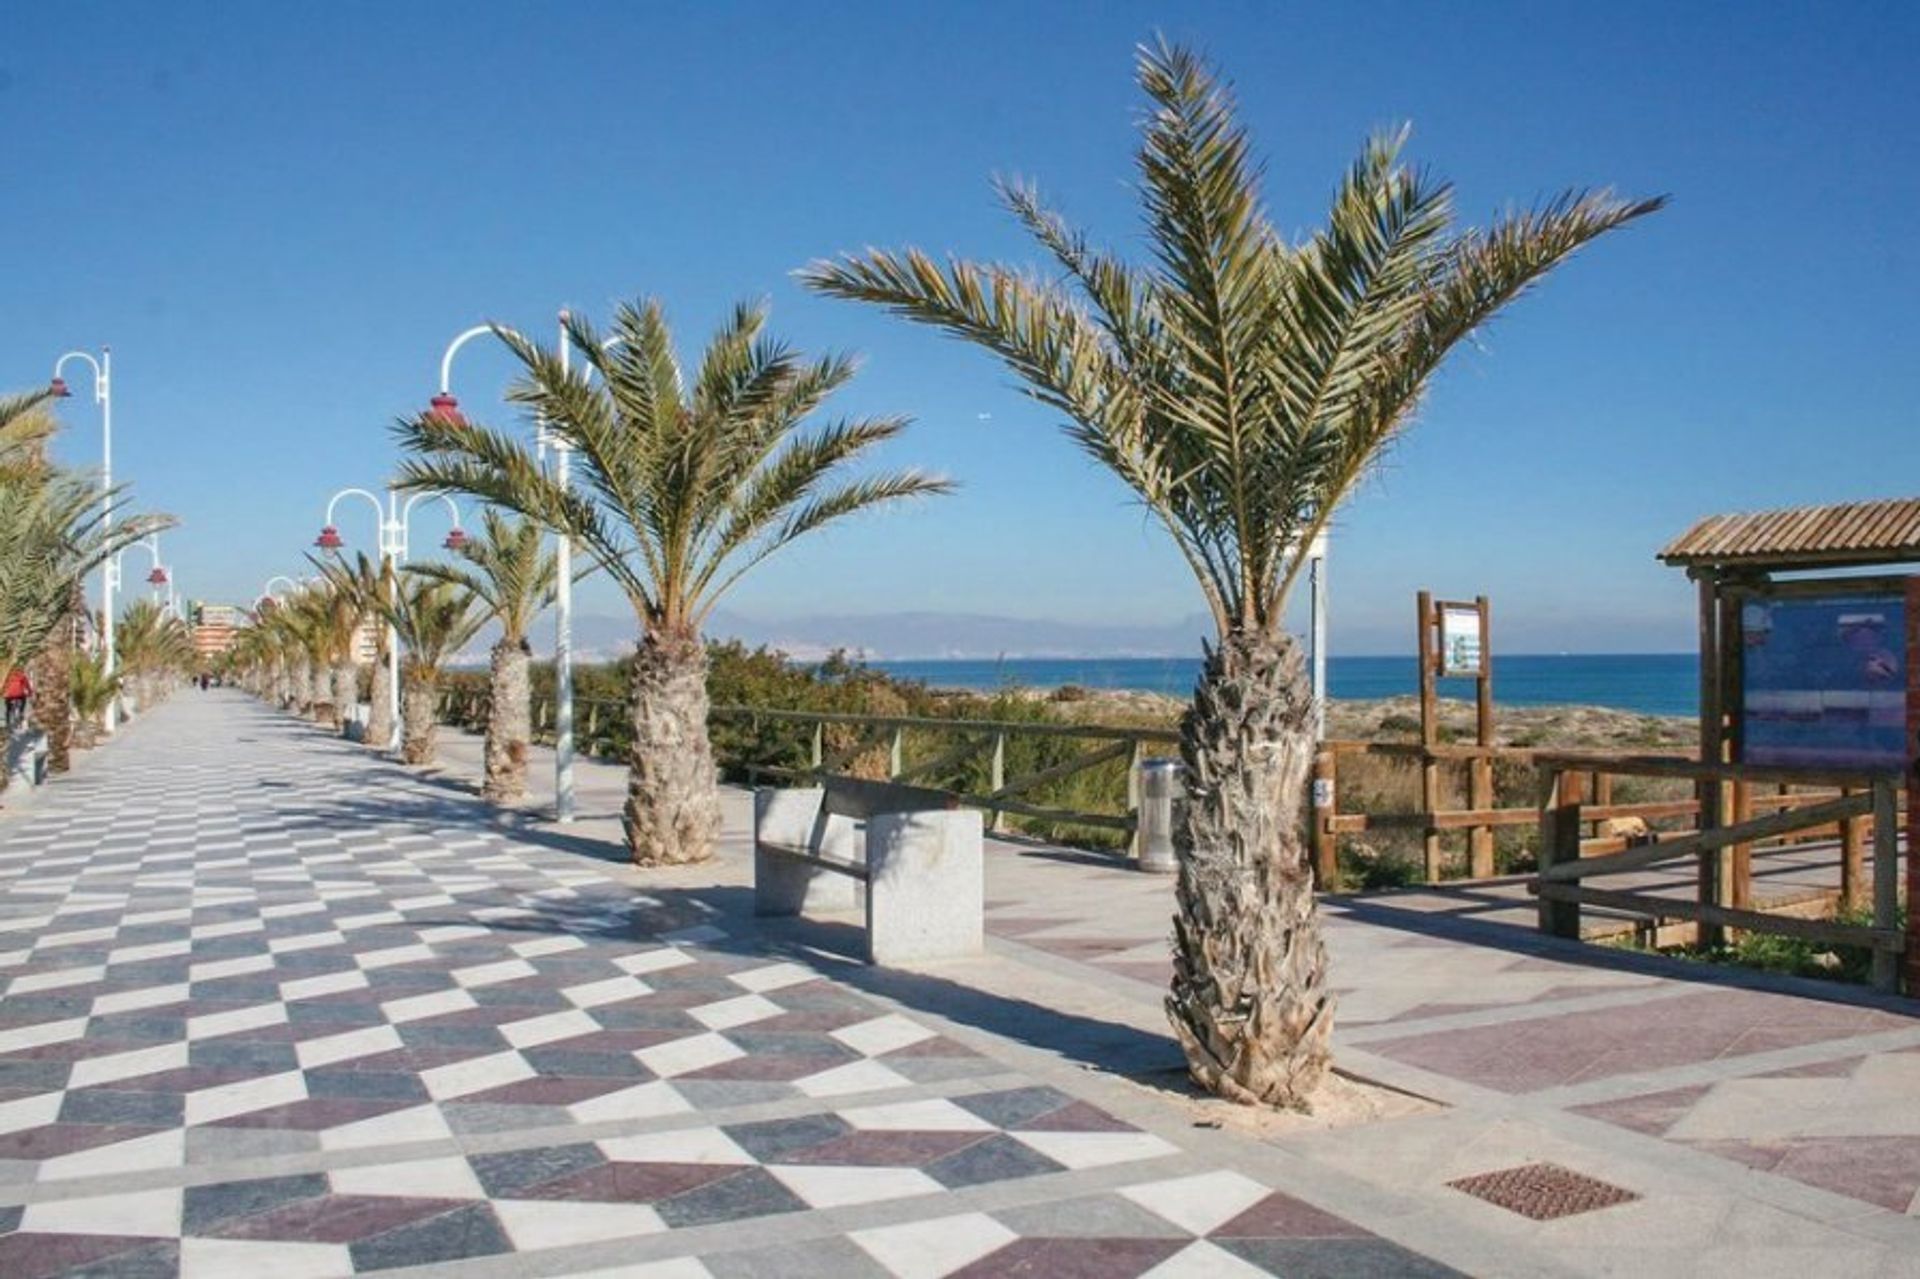 The wide promenade has all the holiday amenities of a modern coastal town